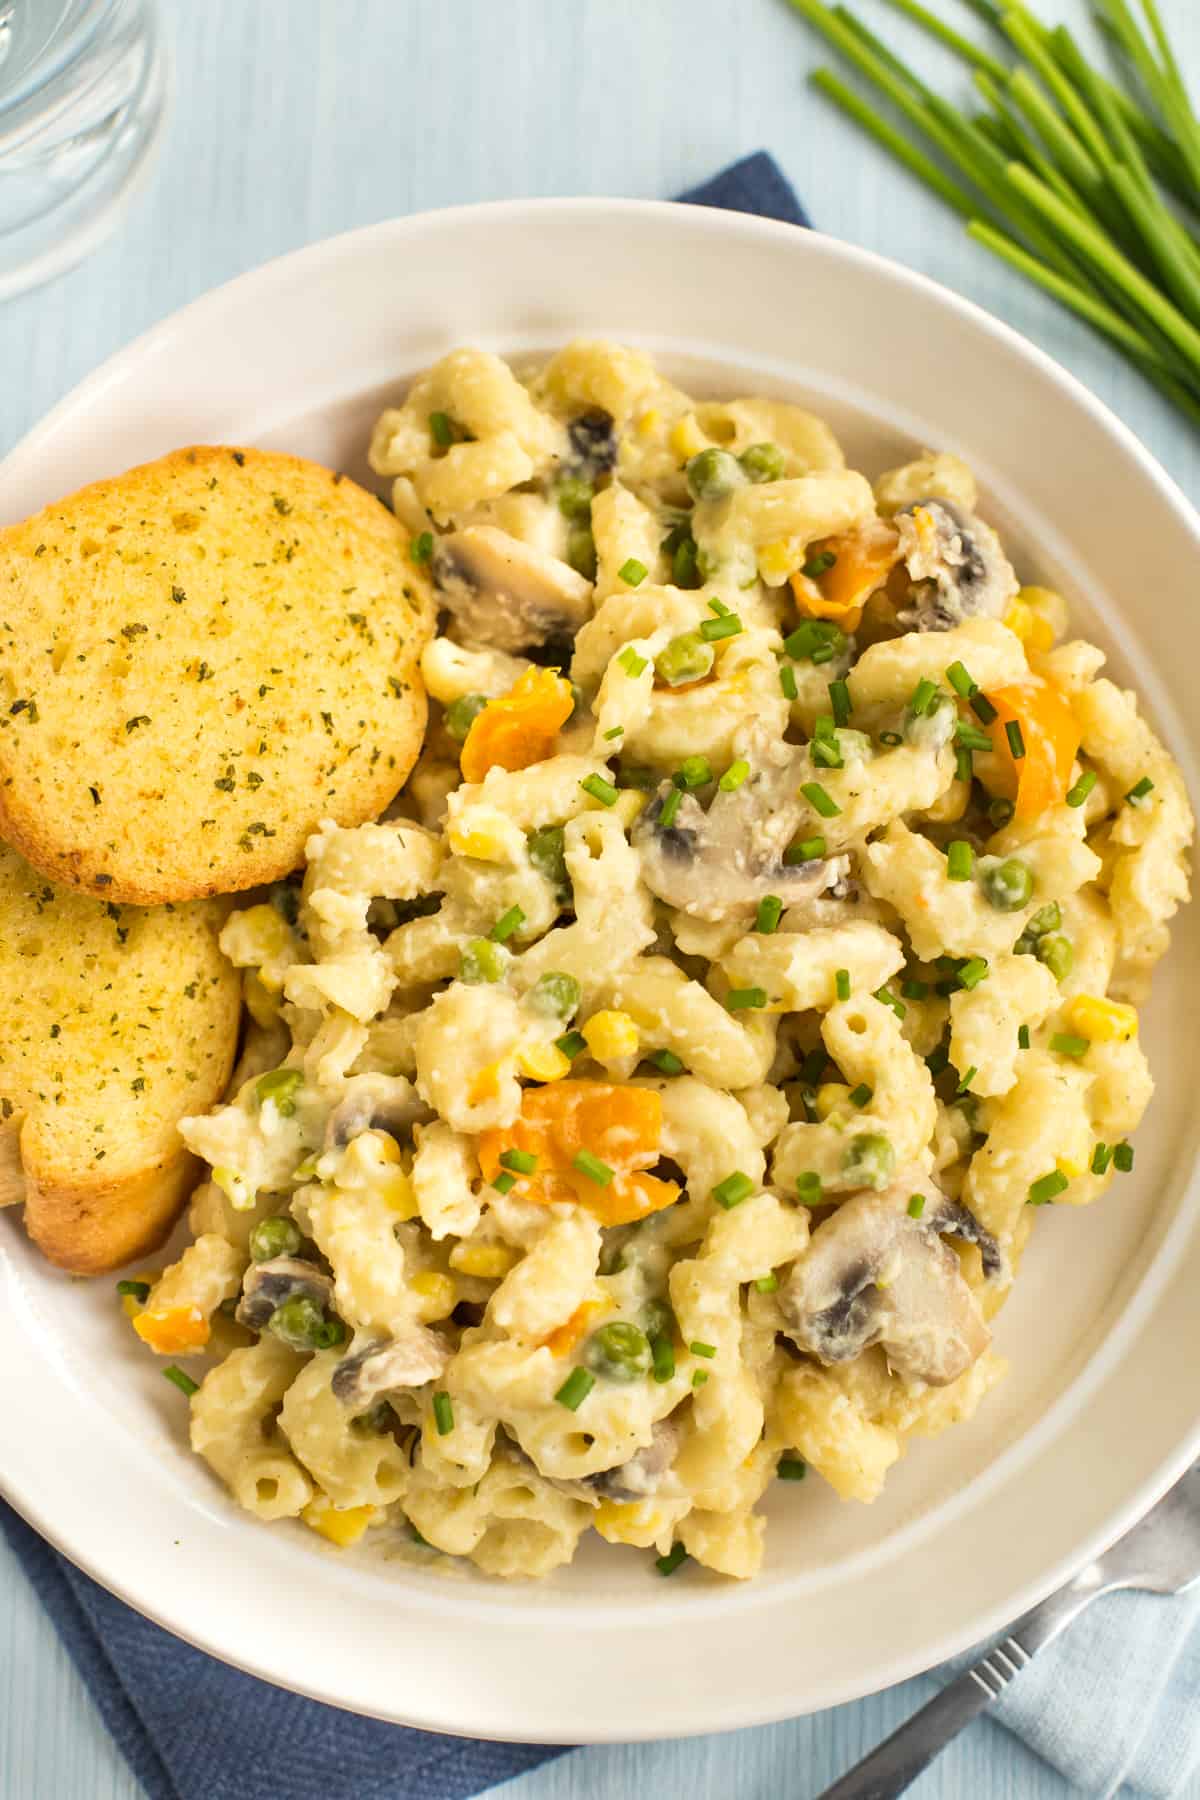 Portion of creamy veggie pasta in a bowl with garlic bread and chives.